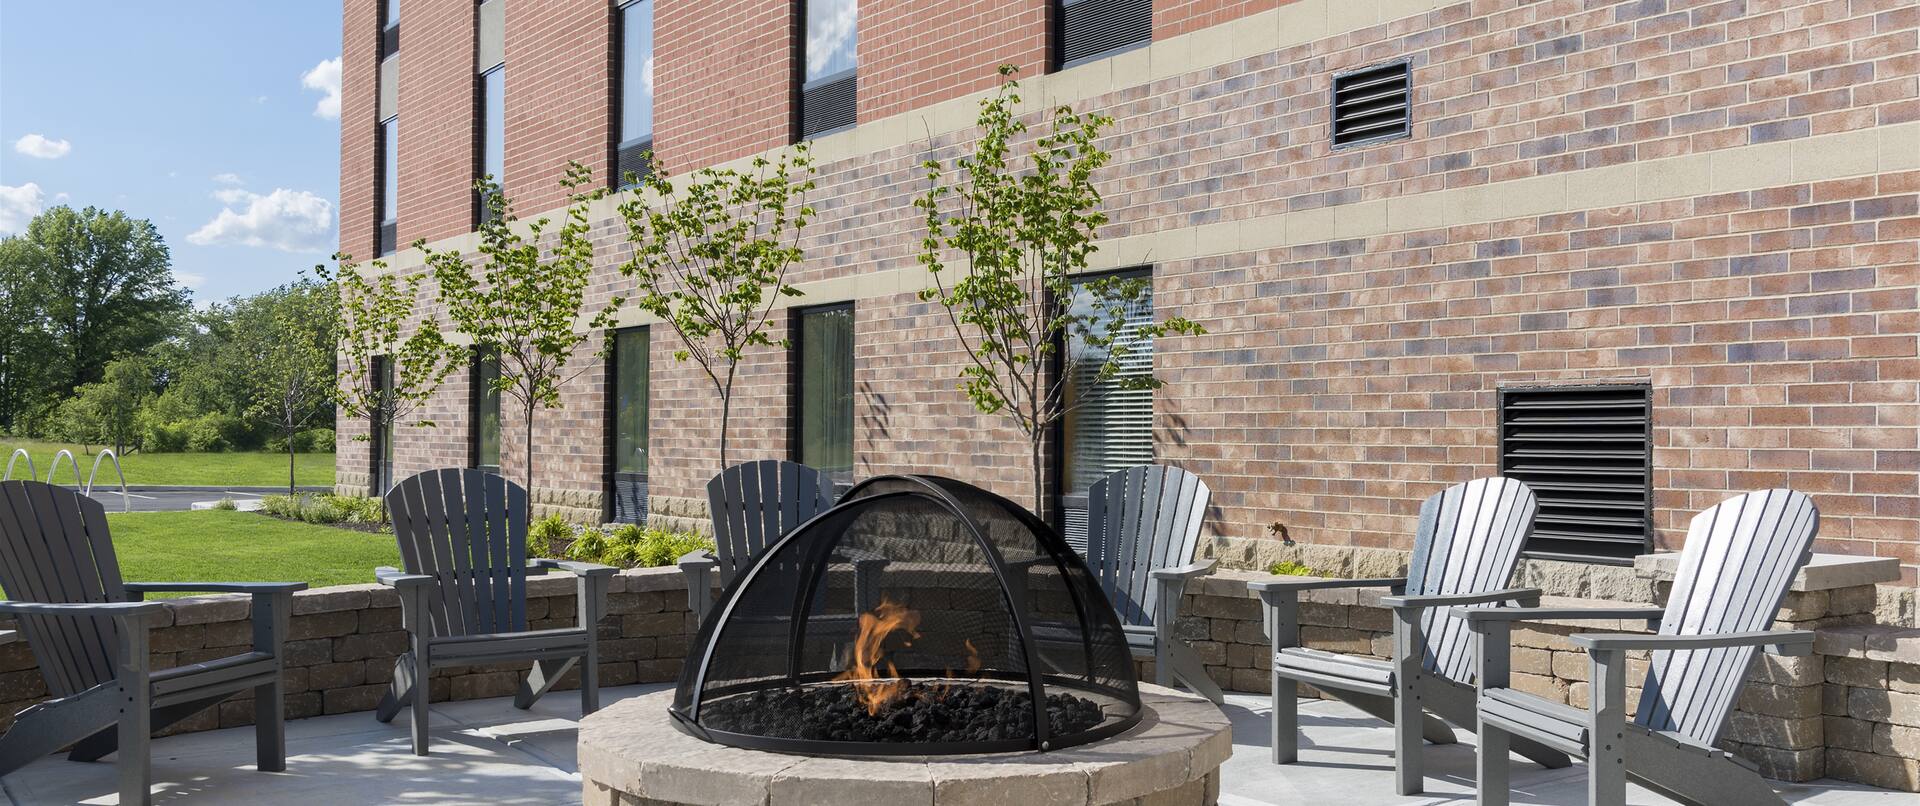 Chairs Around Fire Pit on Outdoor Patio by Hotel Exterior